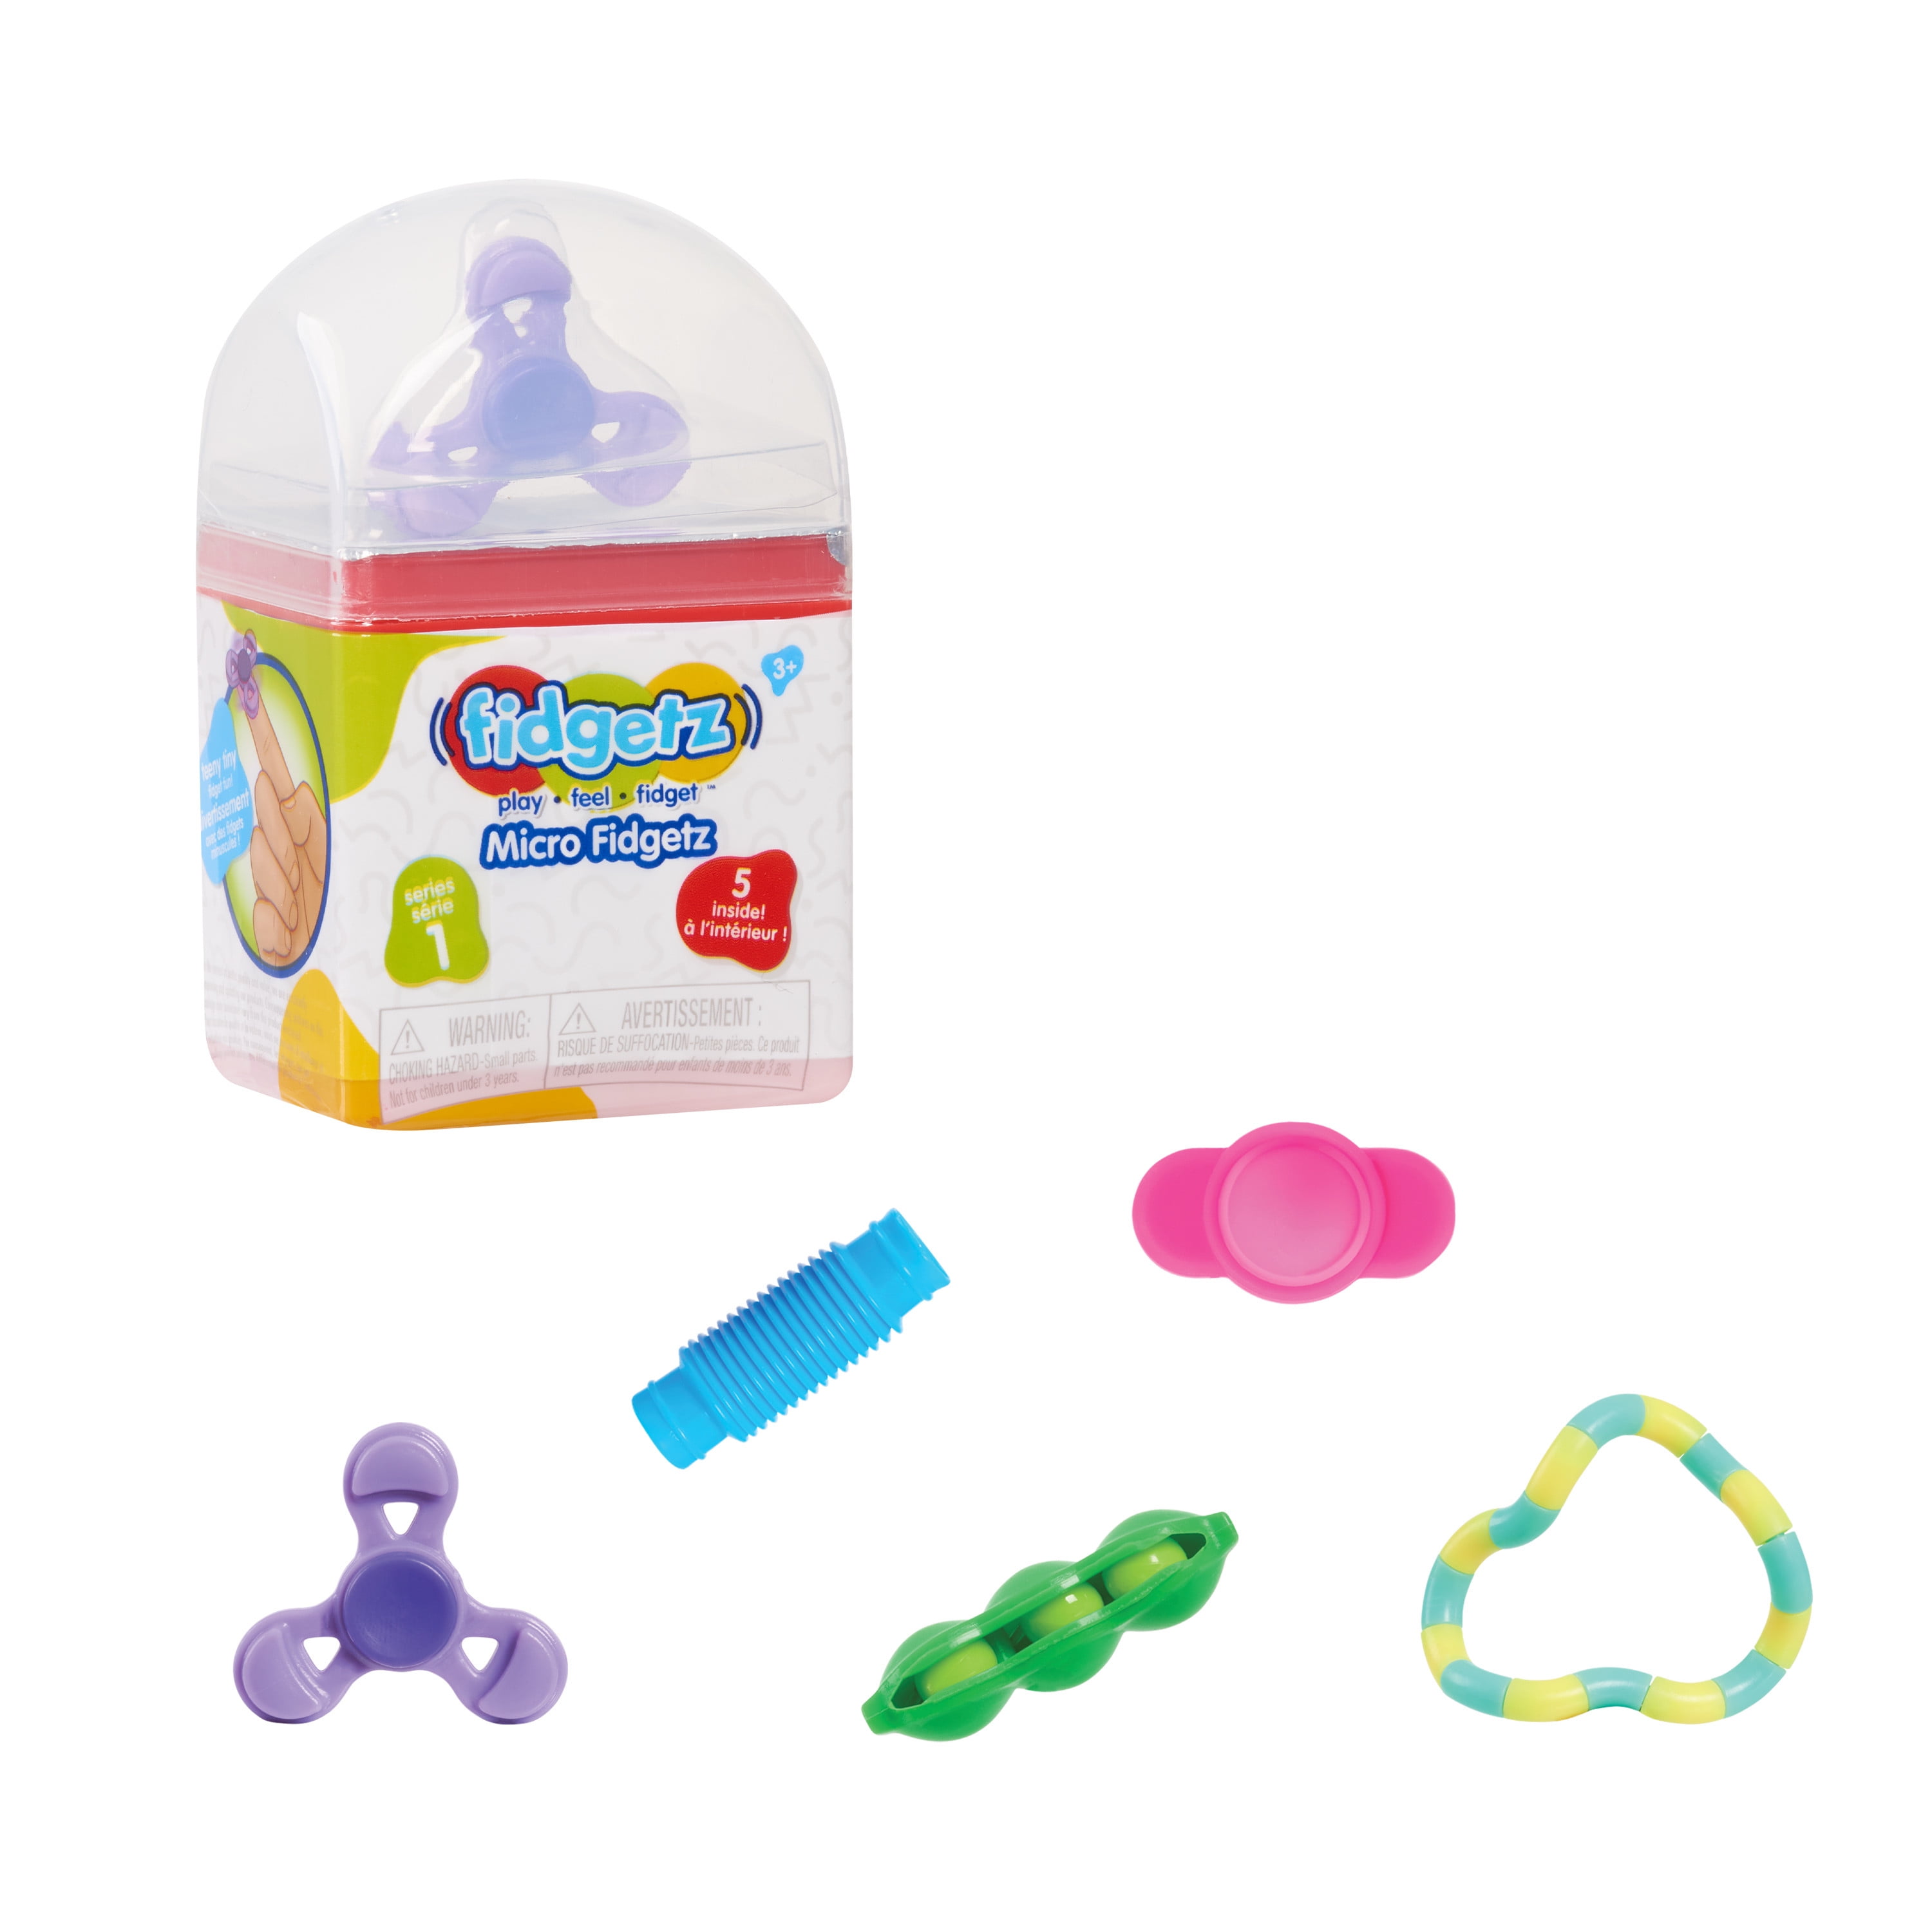 Fidgetz 5-Piece Micro Sensory & Fidget Toys in Blind Capsule, Sold Separately, Styles May Vary,  Kids Toys for Ages 3 Up, Gifts and Presents